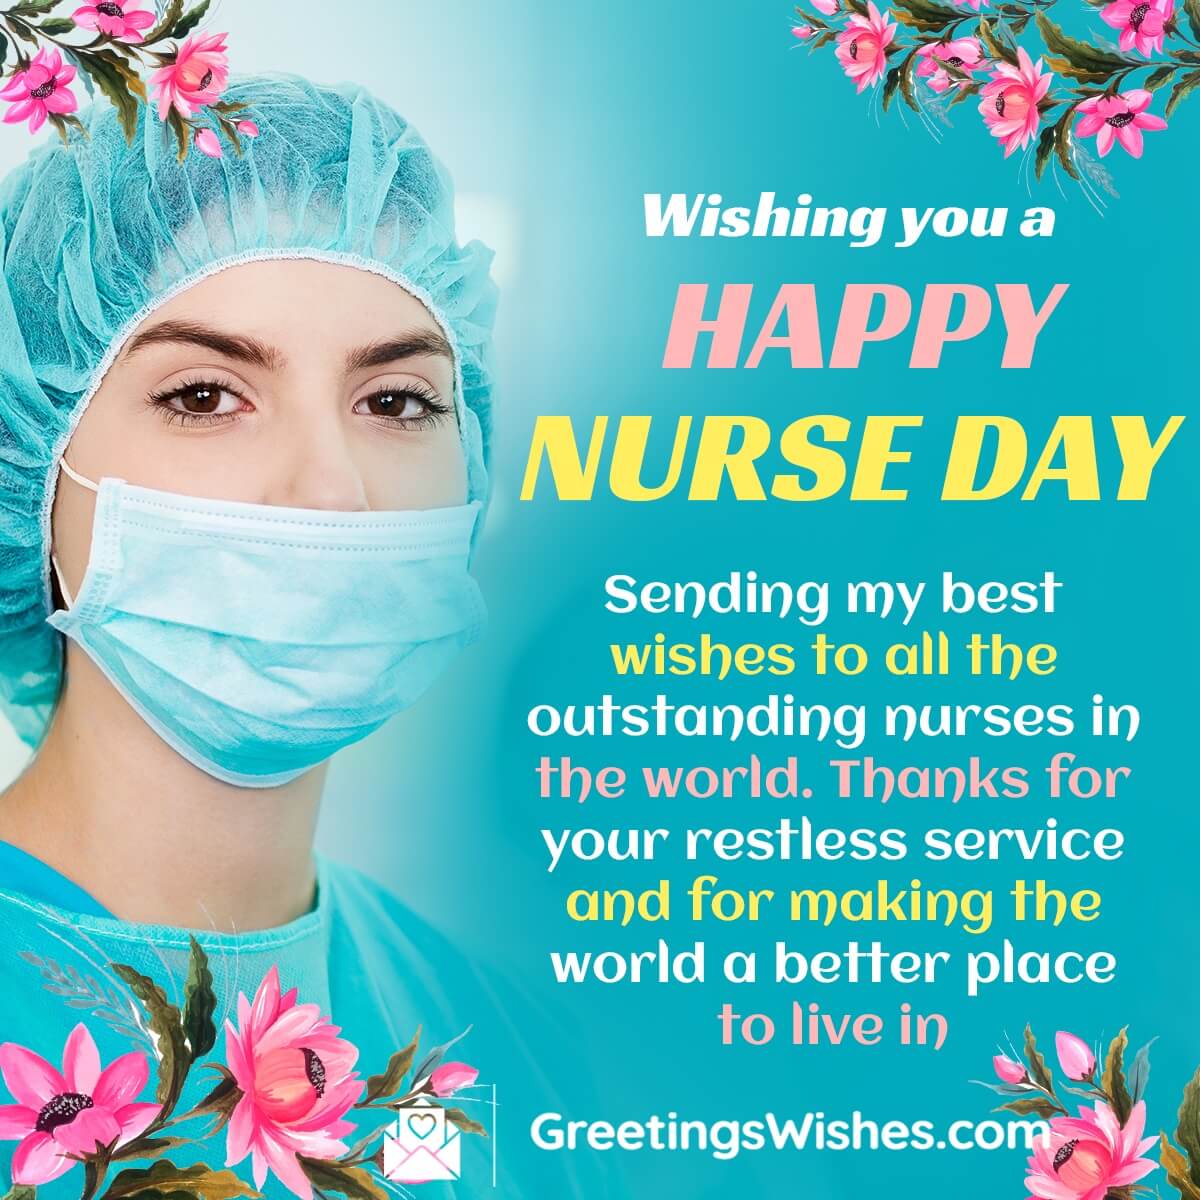 International Nurses Day Wishes Messages ( 12 May )